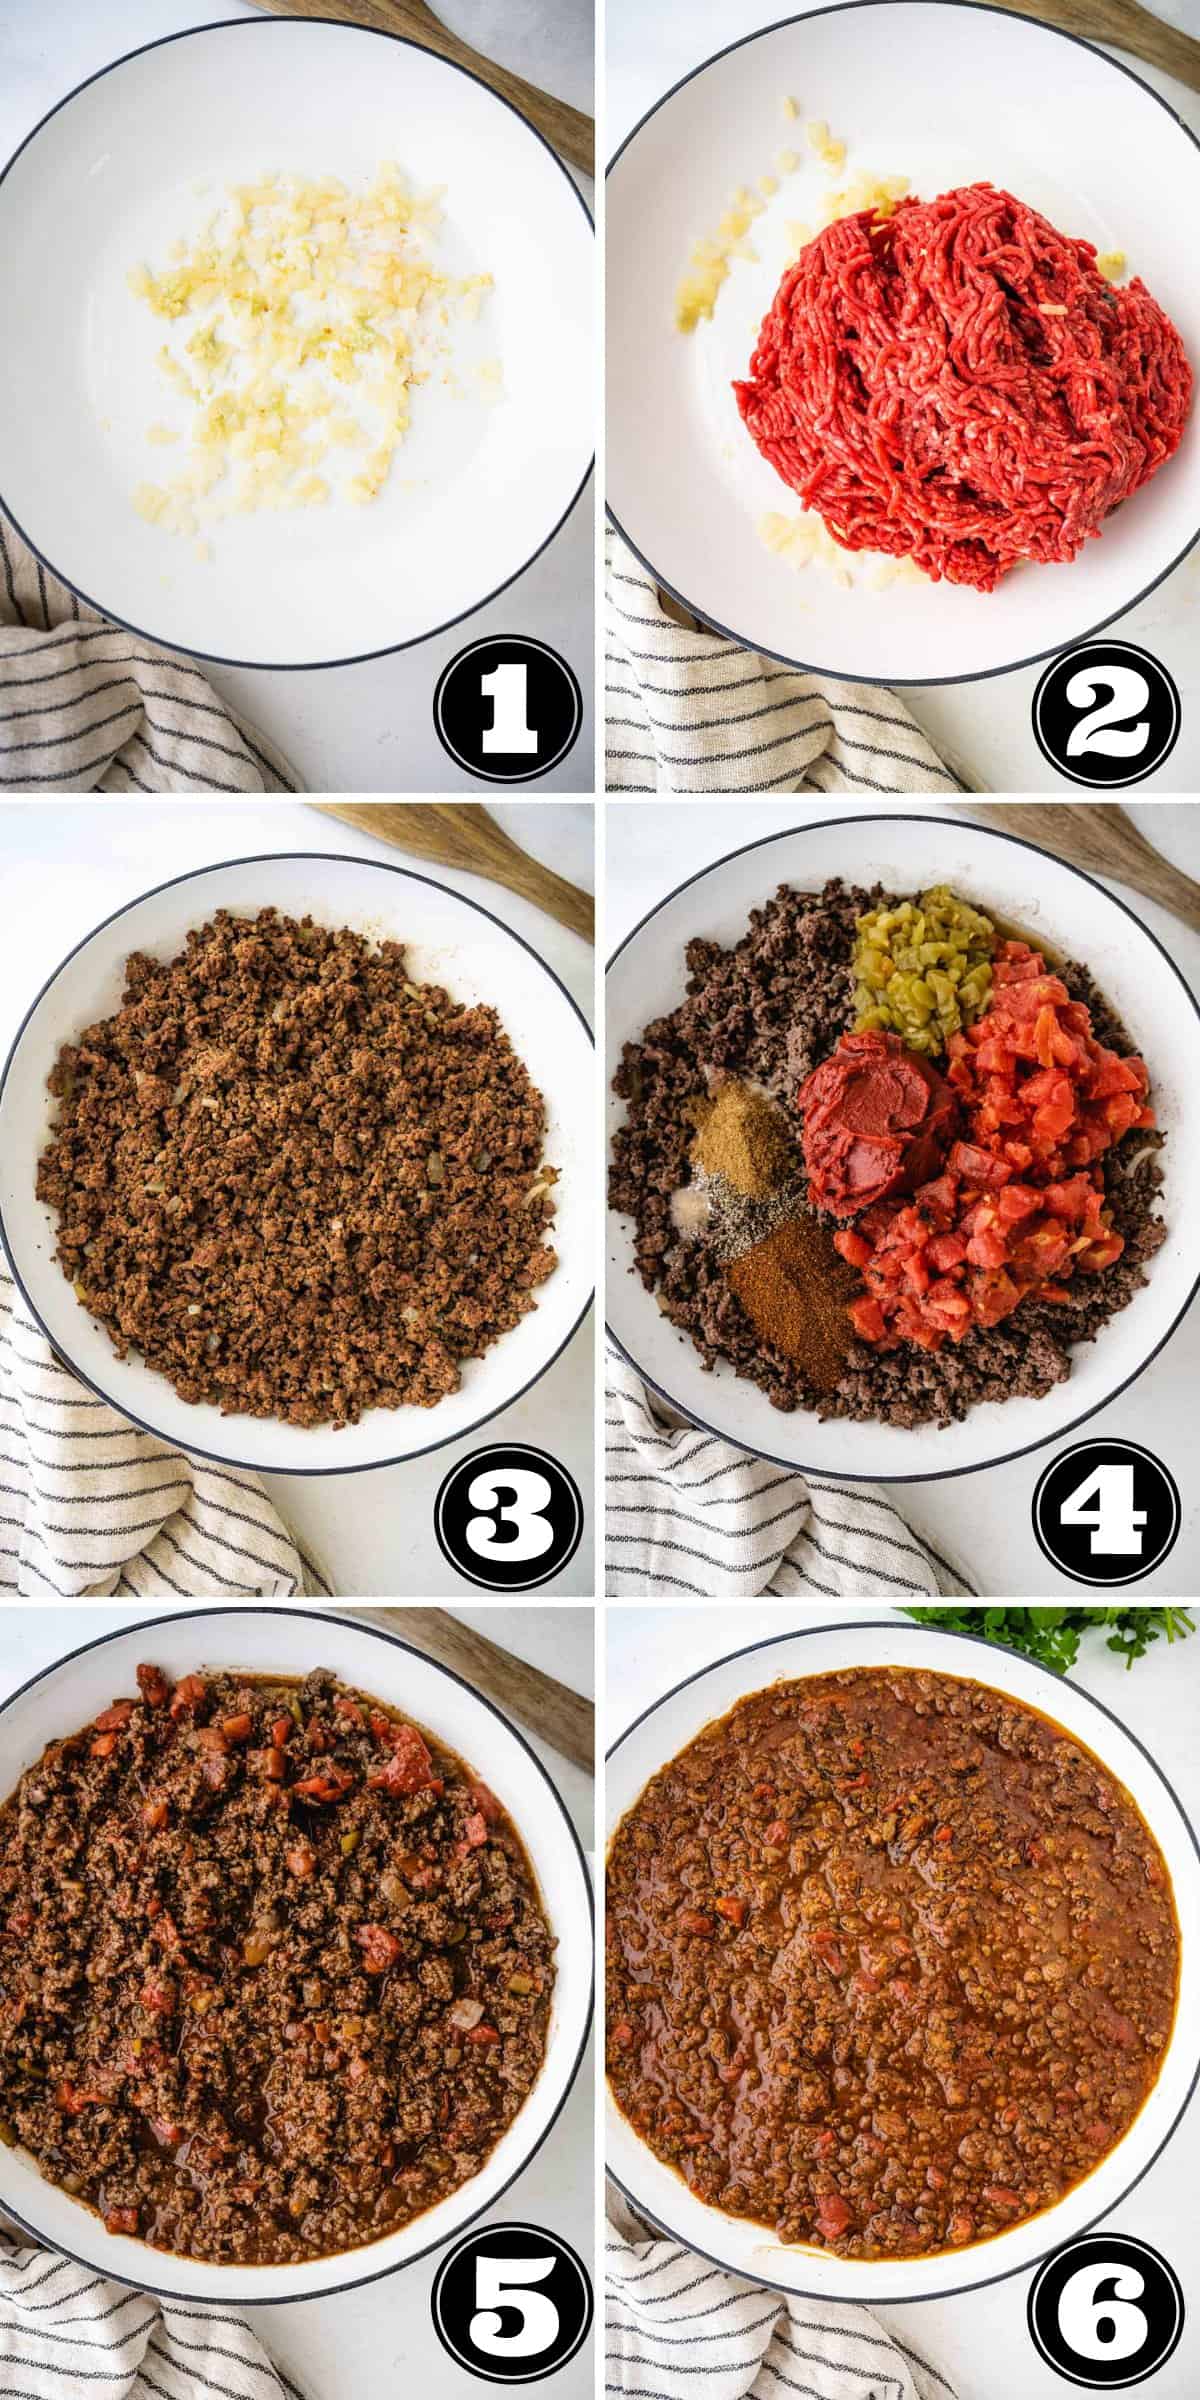 Numbered collage images of steps to make low-carb keto chili.